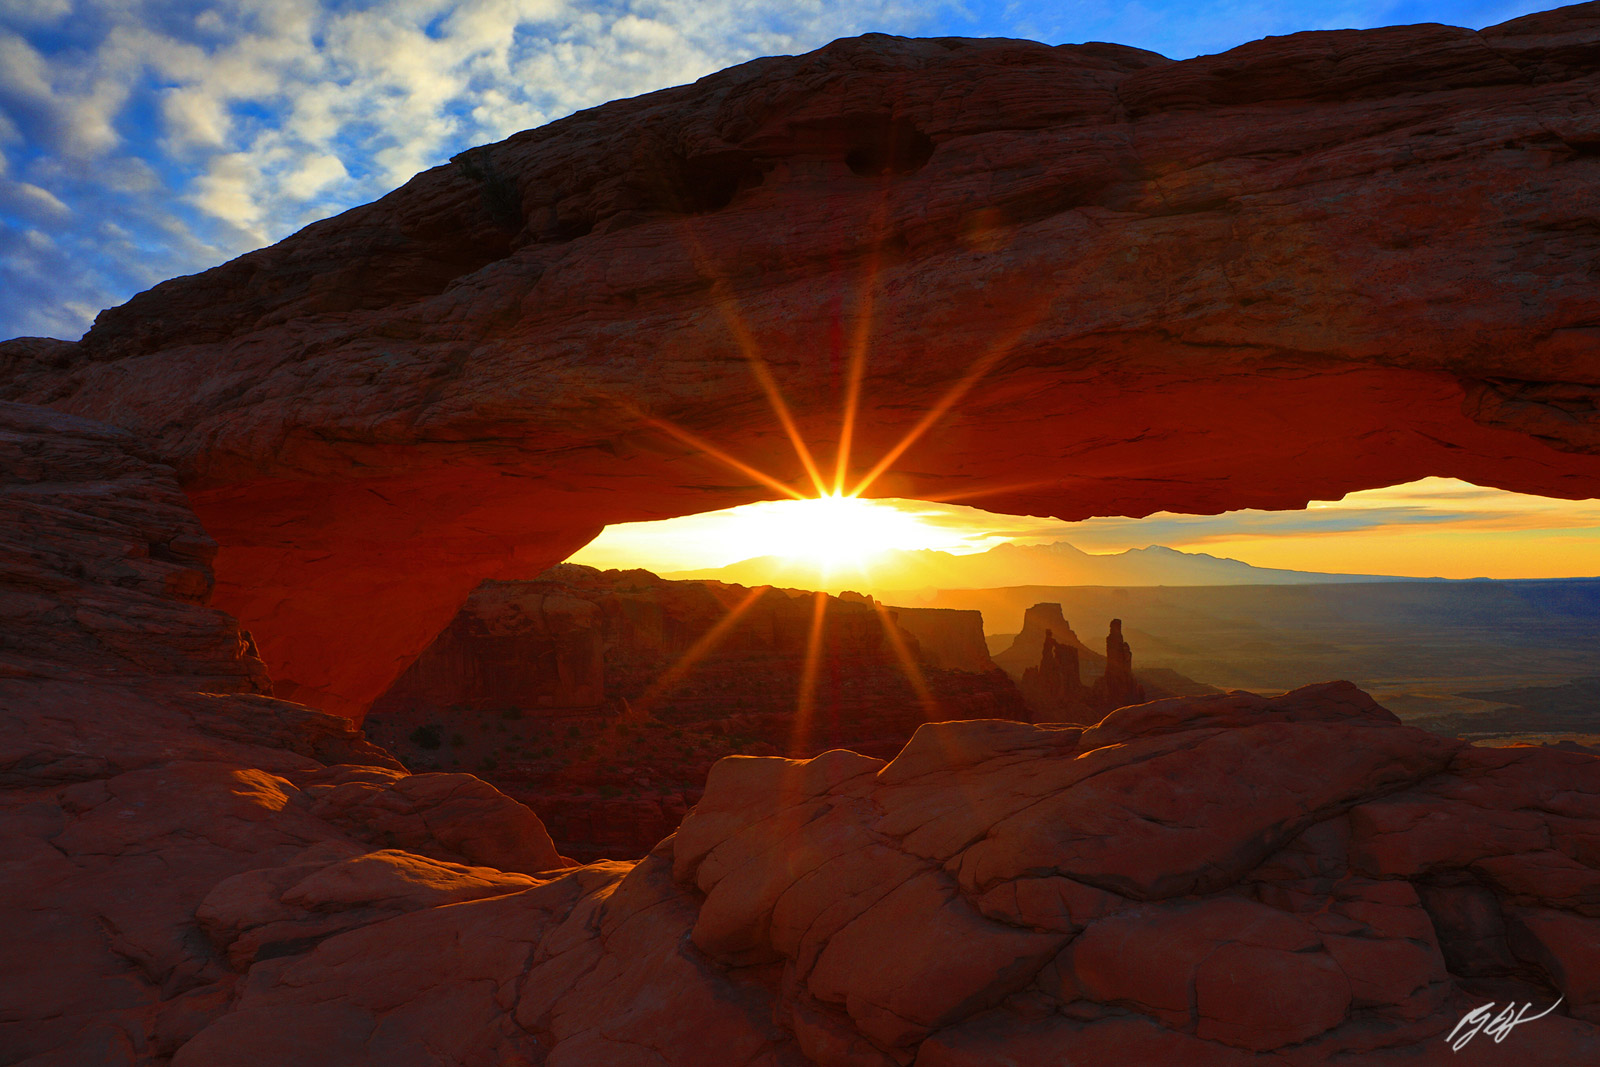 Sunrise and Sun Star under the Mesa Arch in Canyonlands National Park in Utah